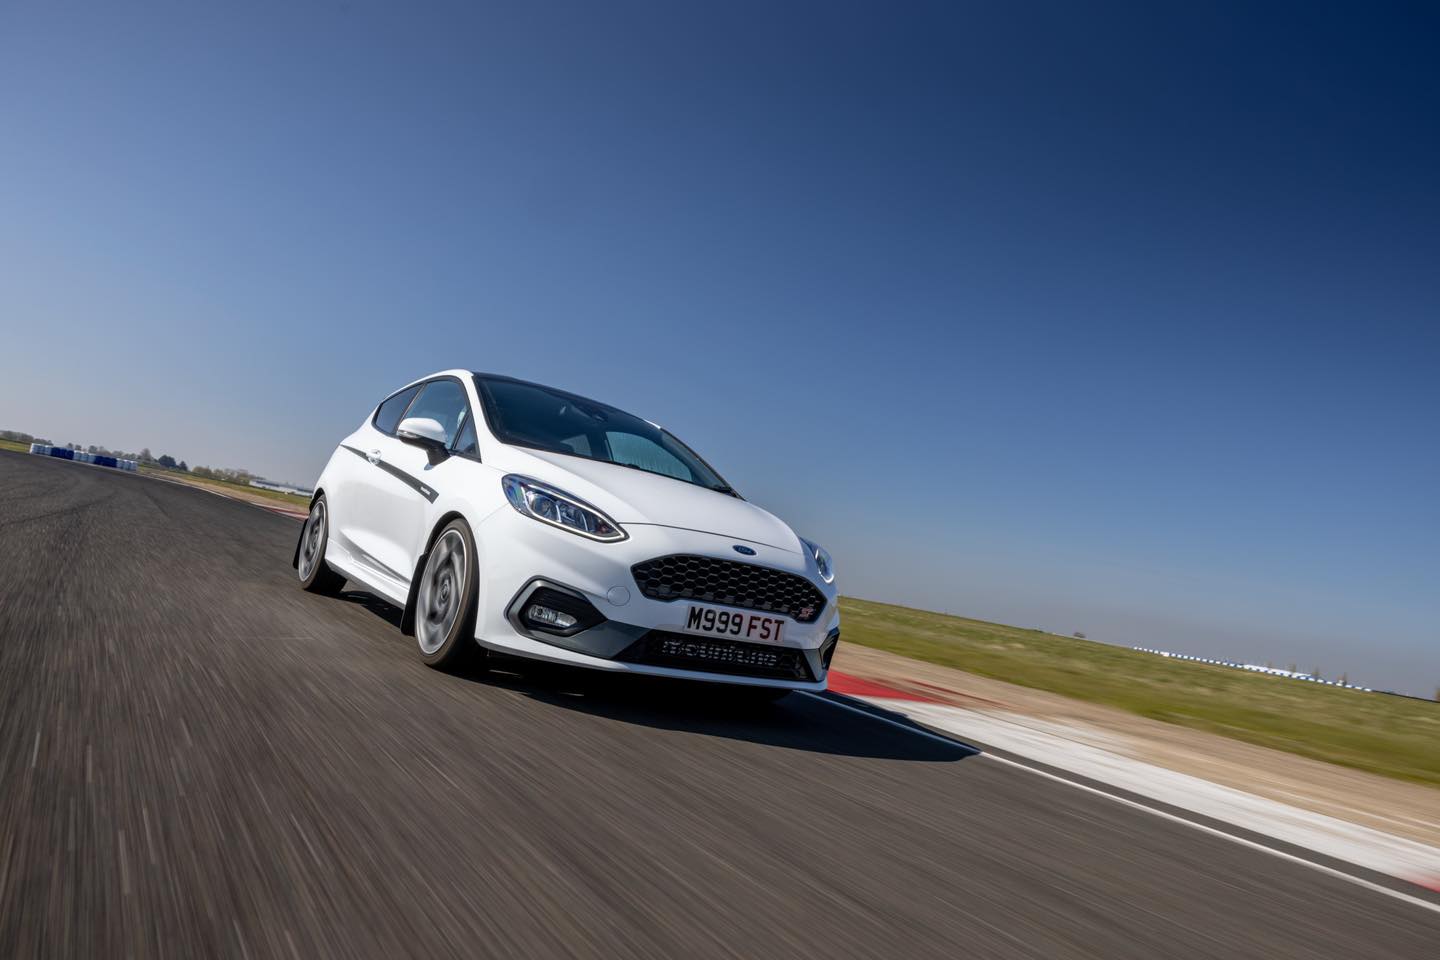 https://s1.cdn.autoevolution.com/images/news/mk8-ford-fiesta-st-with-mountune-m260-upgrade-promises-exhilarating-performance-162567_1.jpg